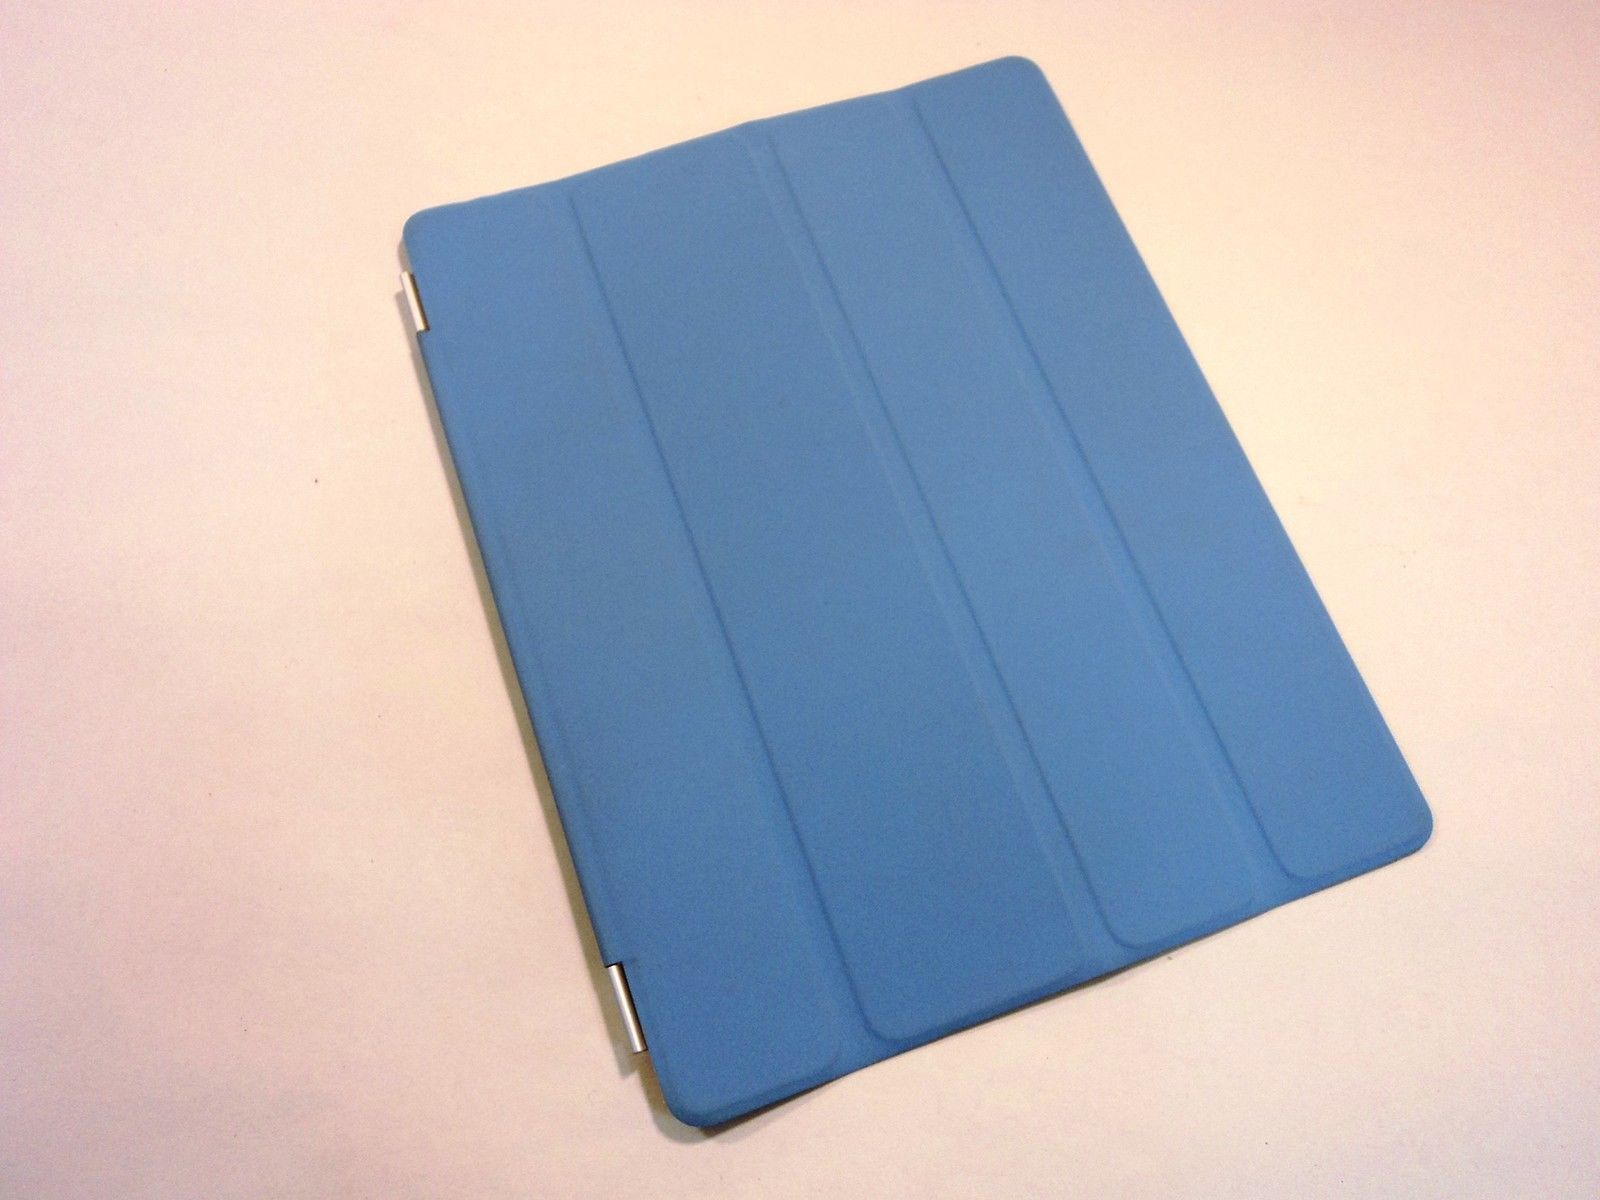 Apple Smart Cover for iPad 2 Blue/Gray Genuine OEM MD310LL/A - $16.56